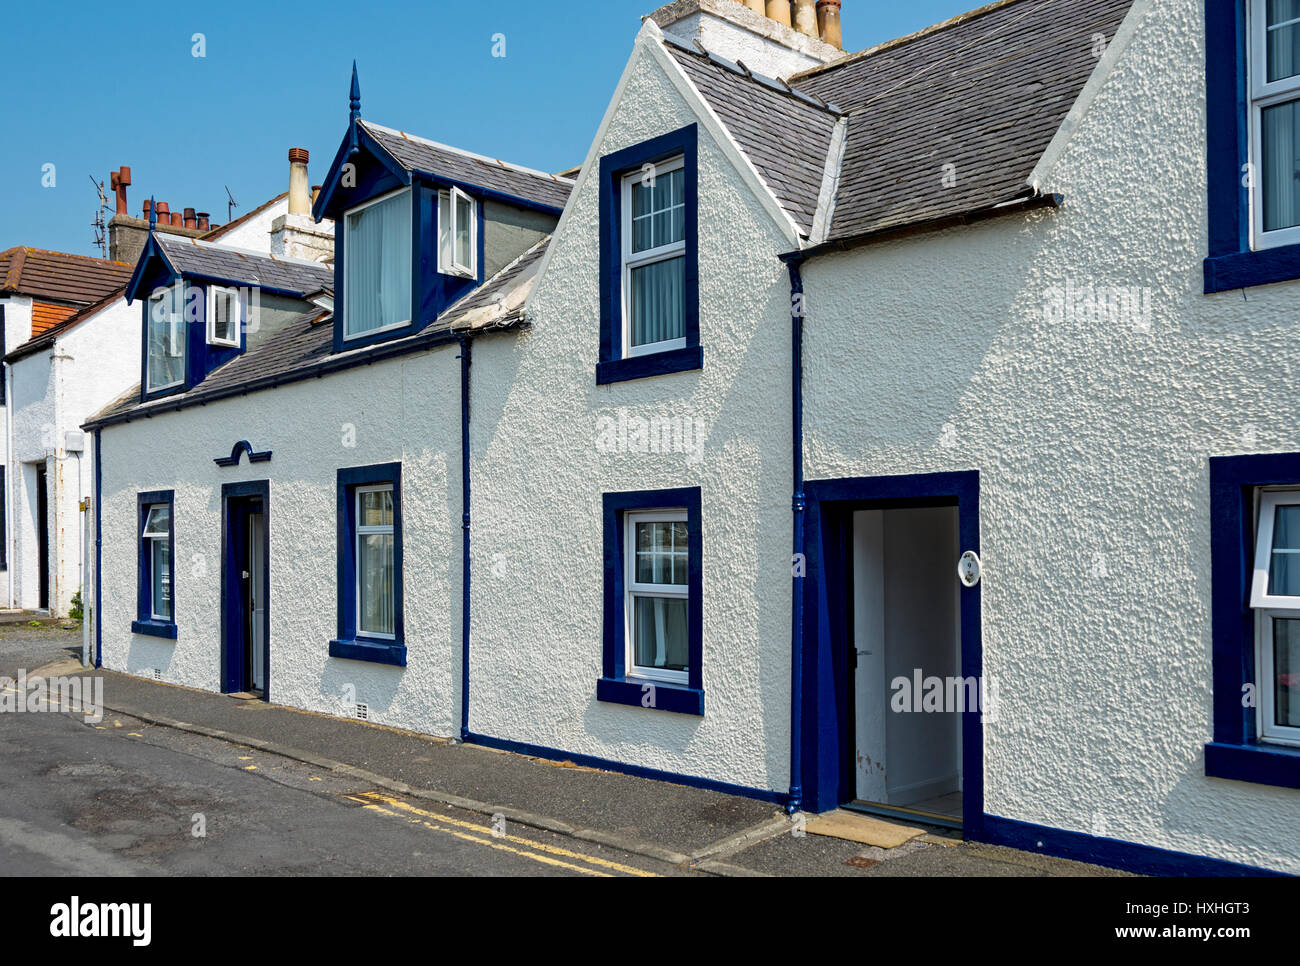 Brightly painted houses at Portpatrick, Dumfries and Galloway, Scotland, UK Stock Photo